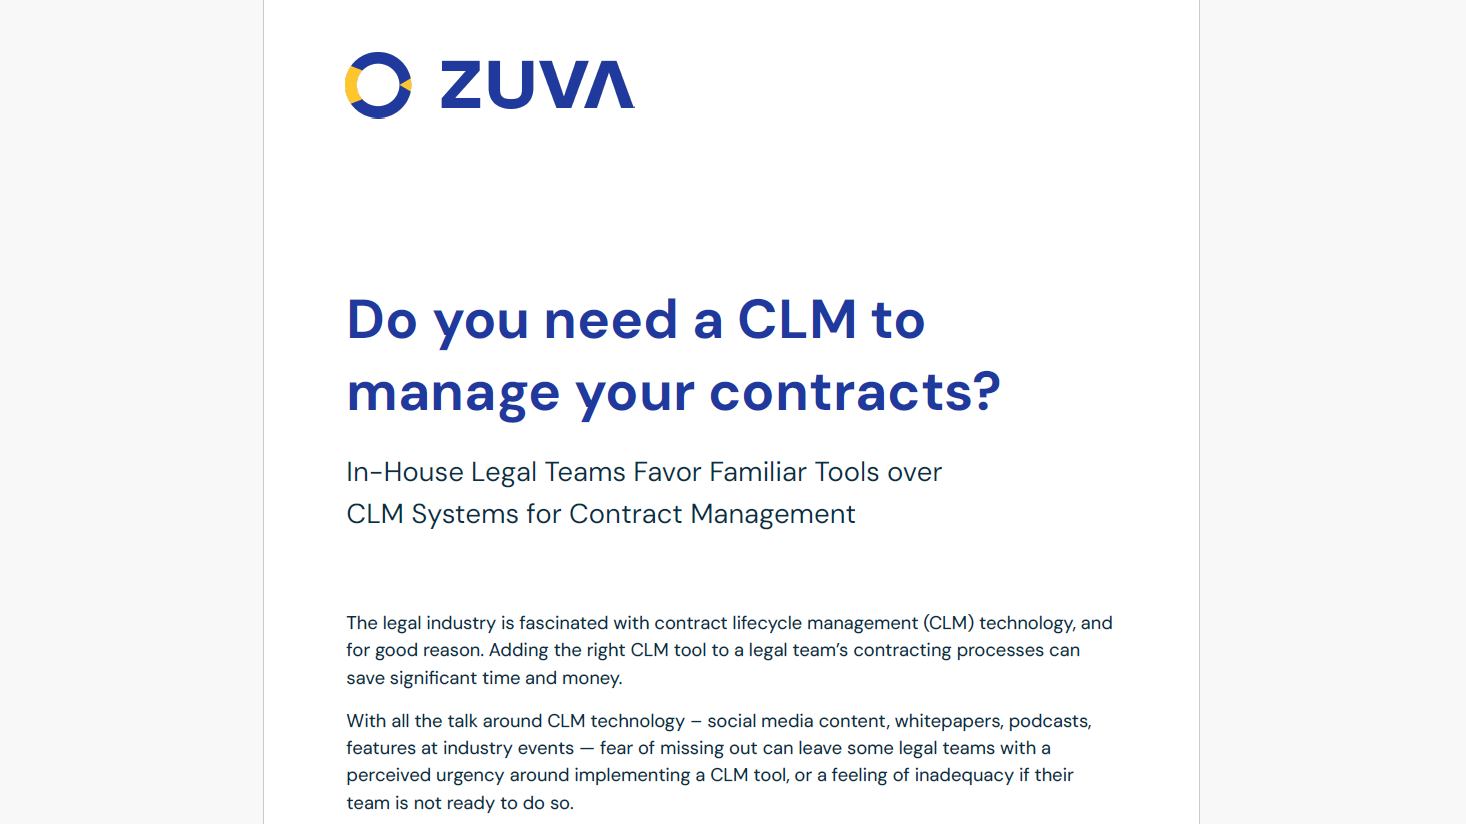 Despite All the Hype Over CLM Software, Most Companies Don&#8217;t Use It to Manage their Contracts, Survey Finds